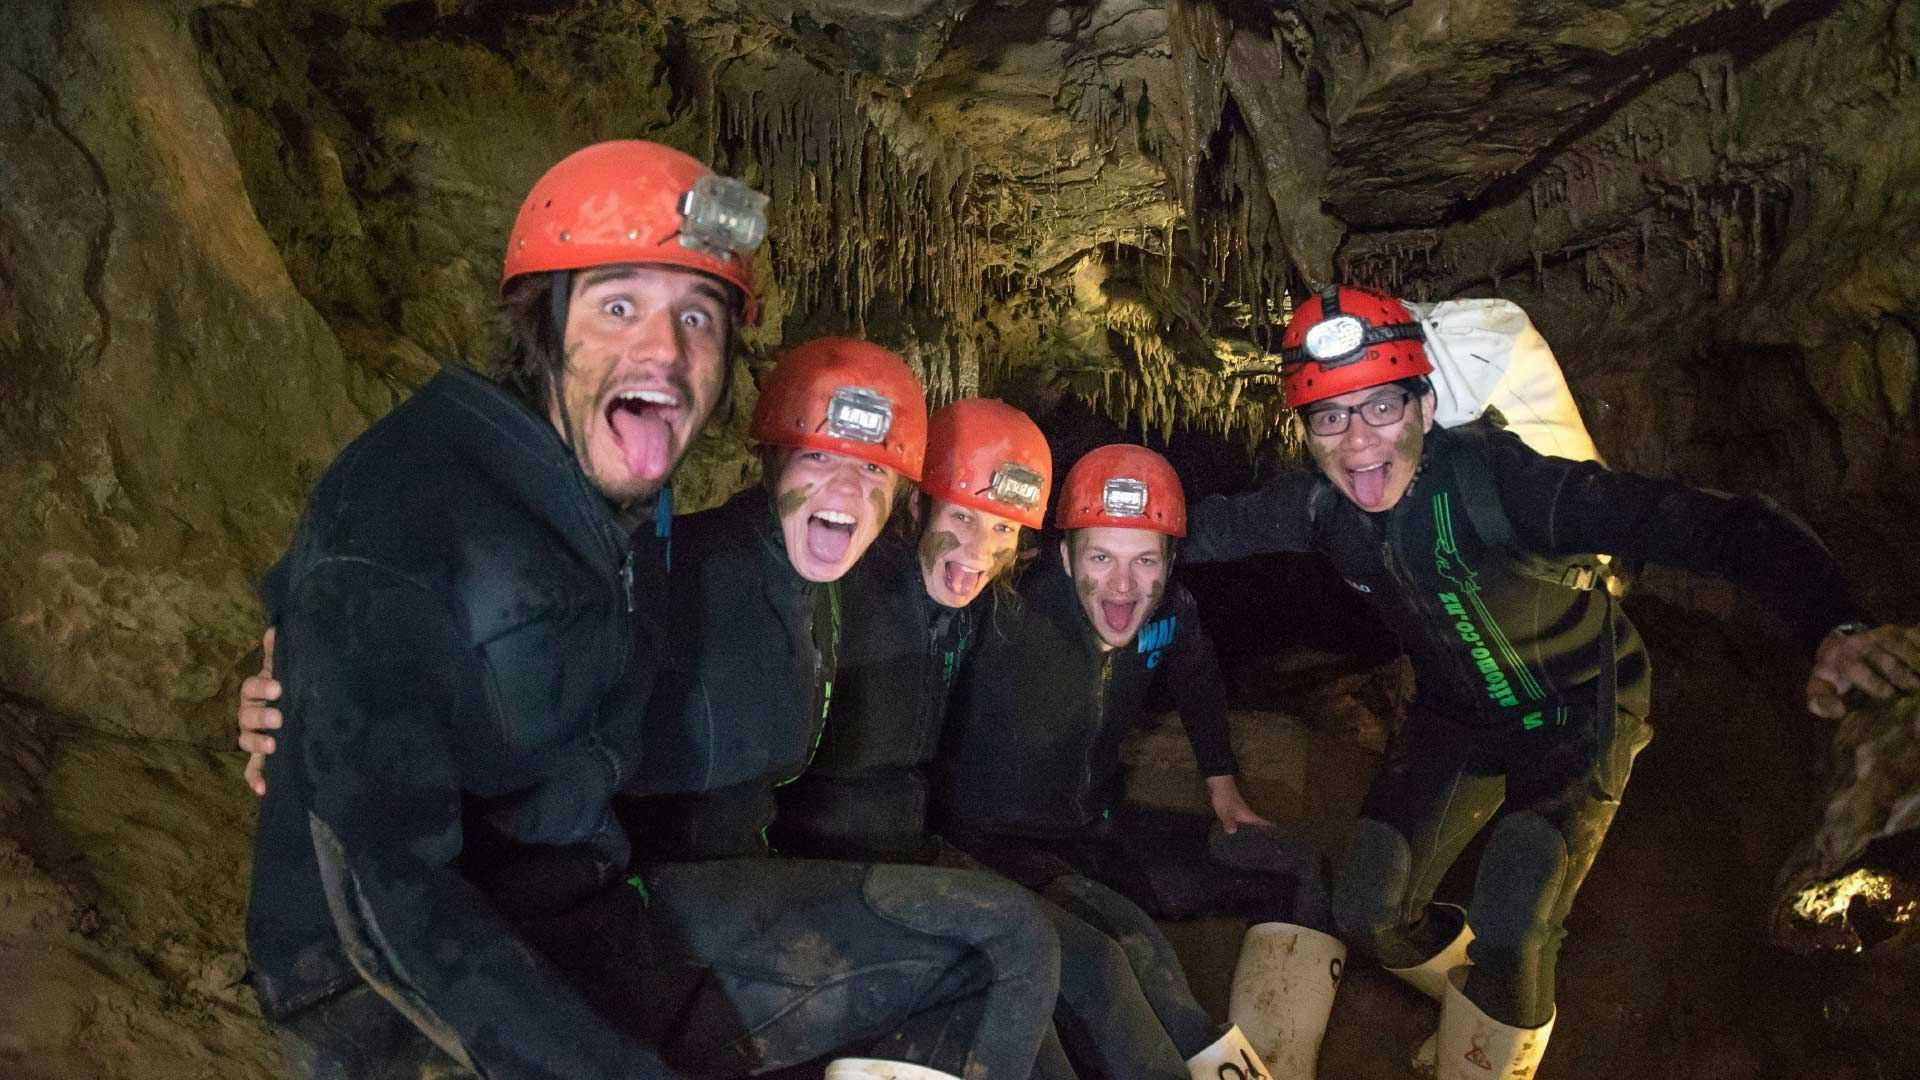 Group of people pose for a photo in a cave